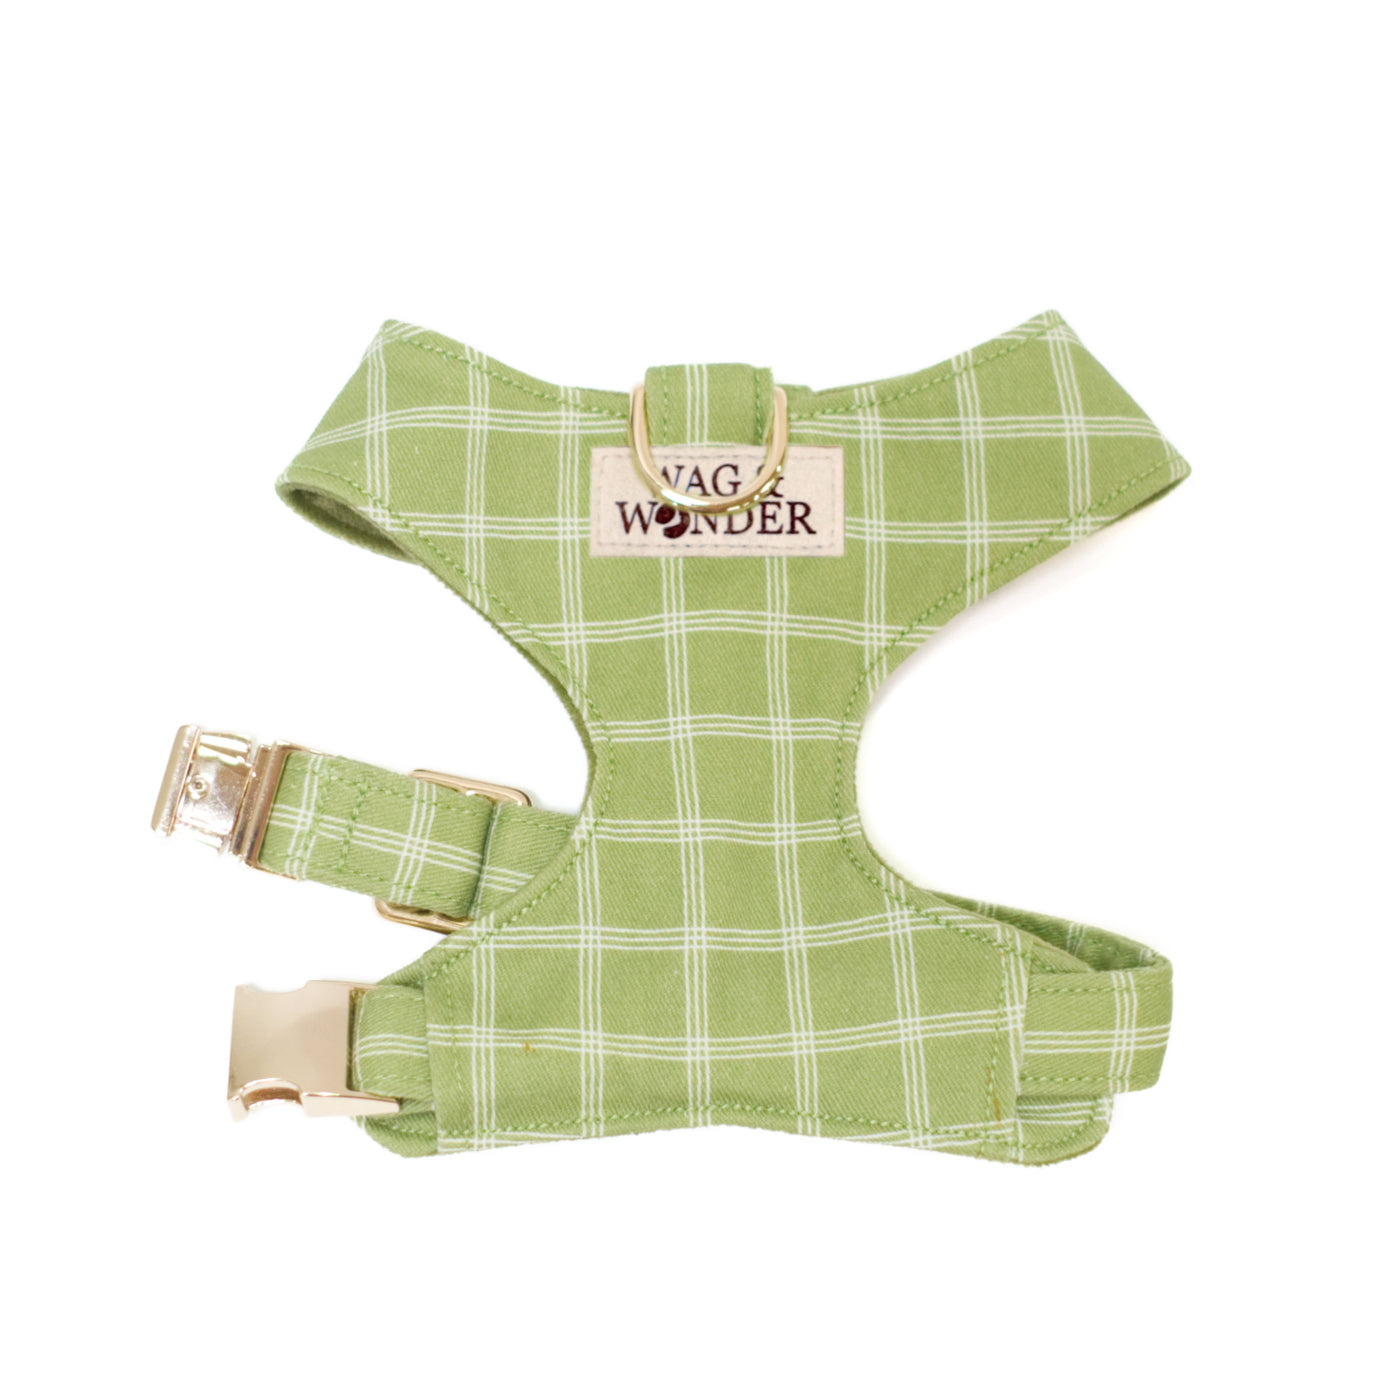 Olive green plaid dog harness with gold hardware show in size XS